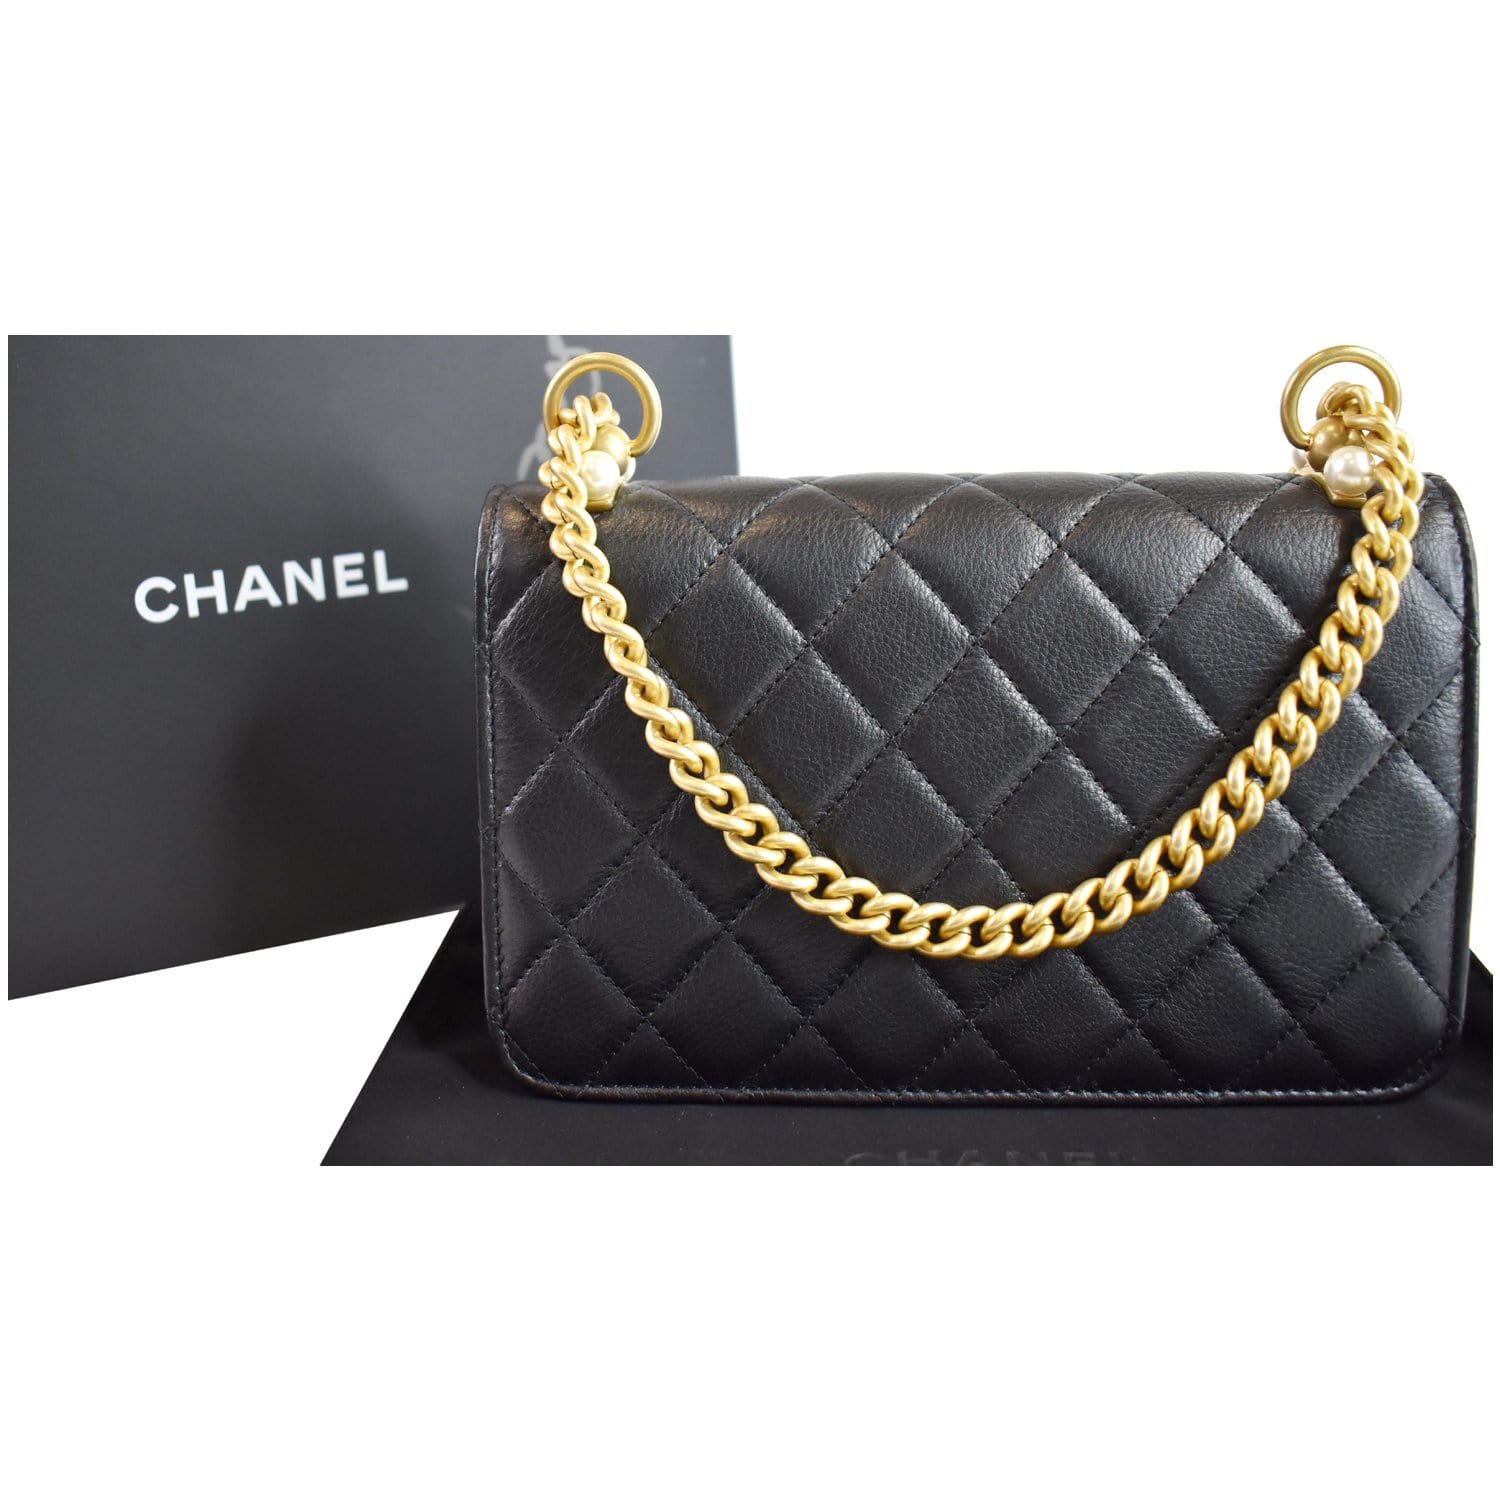 pearl chain chanel bag authentic